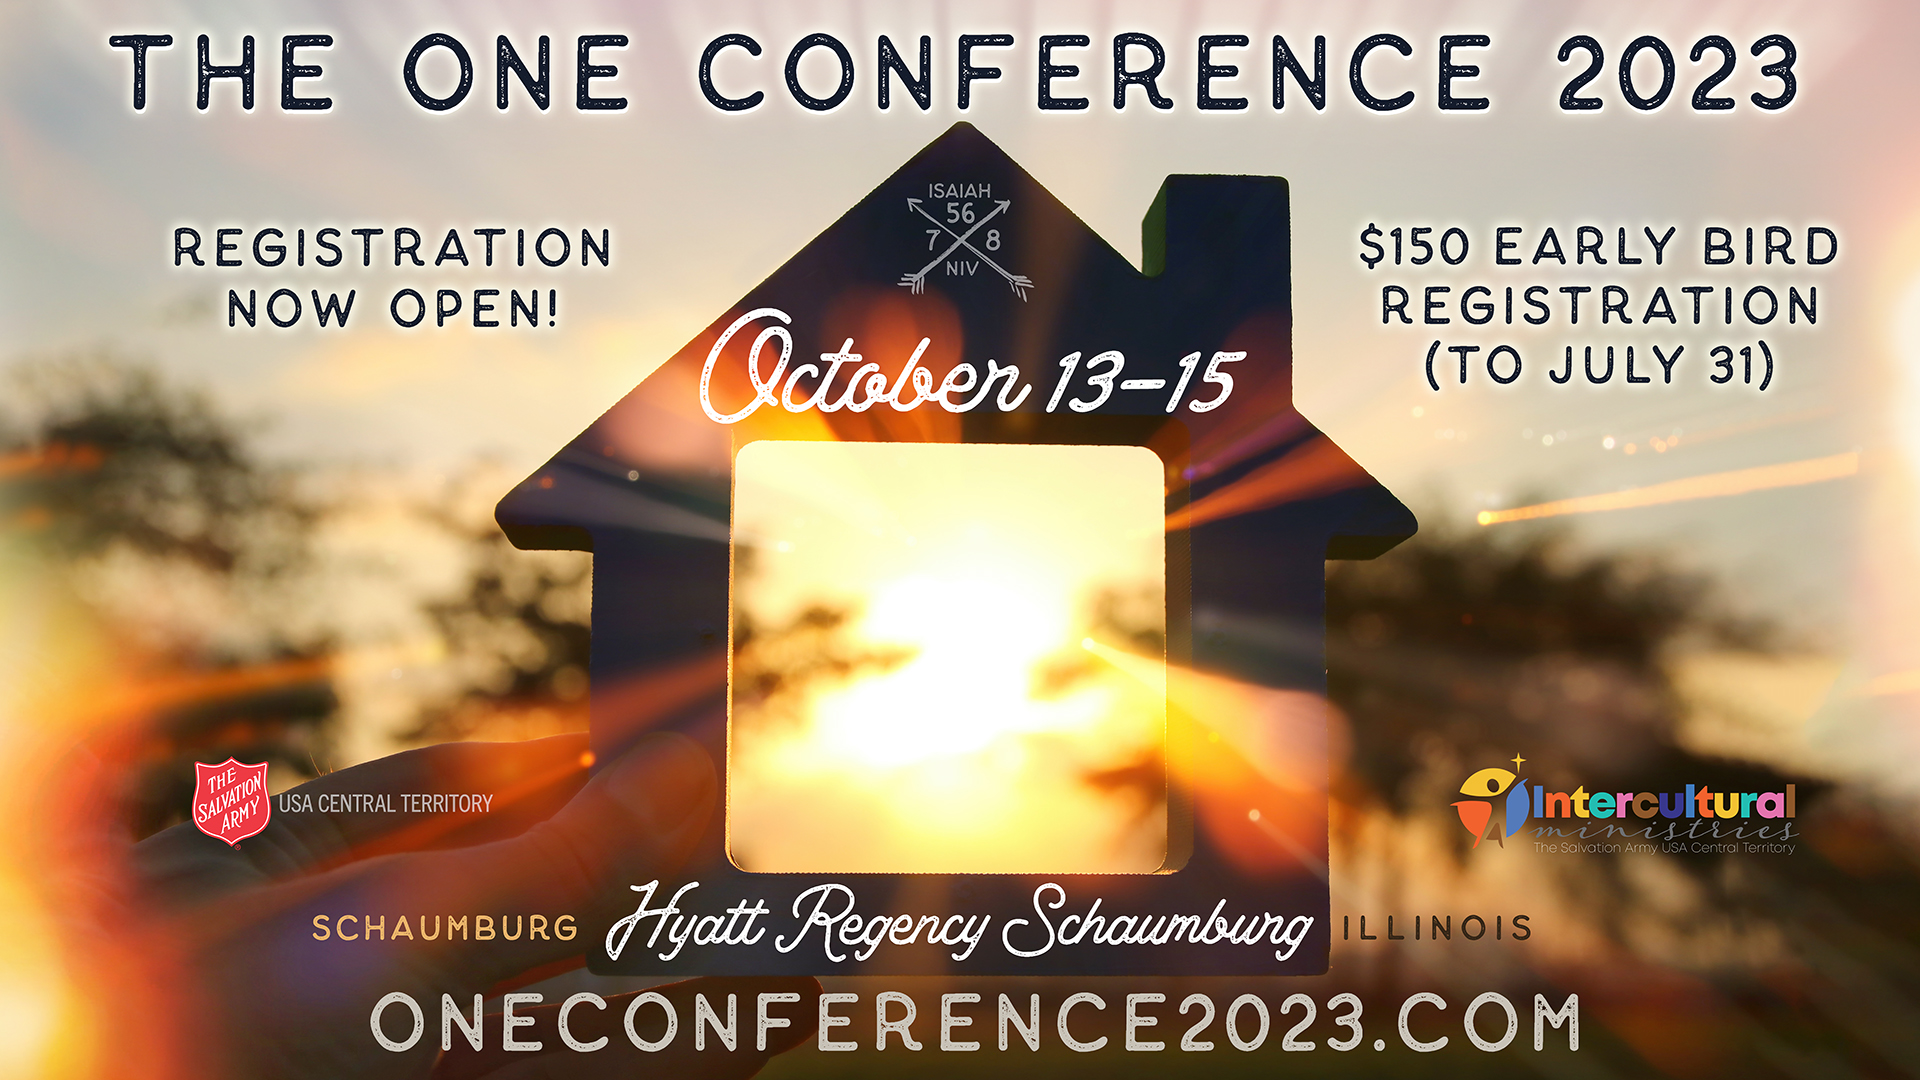 THE ONE CONFERENCE GATHERING Intercultural Ministries